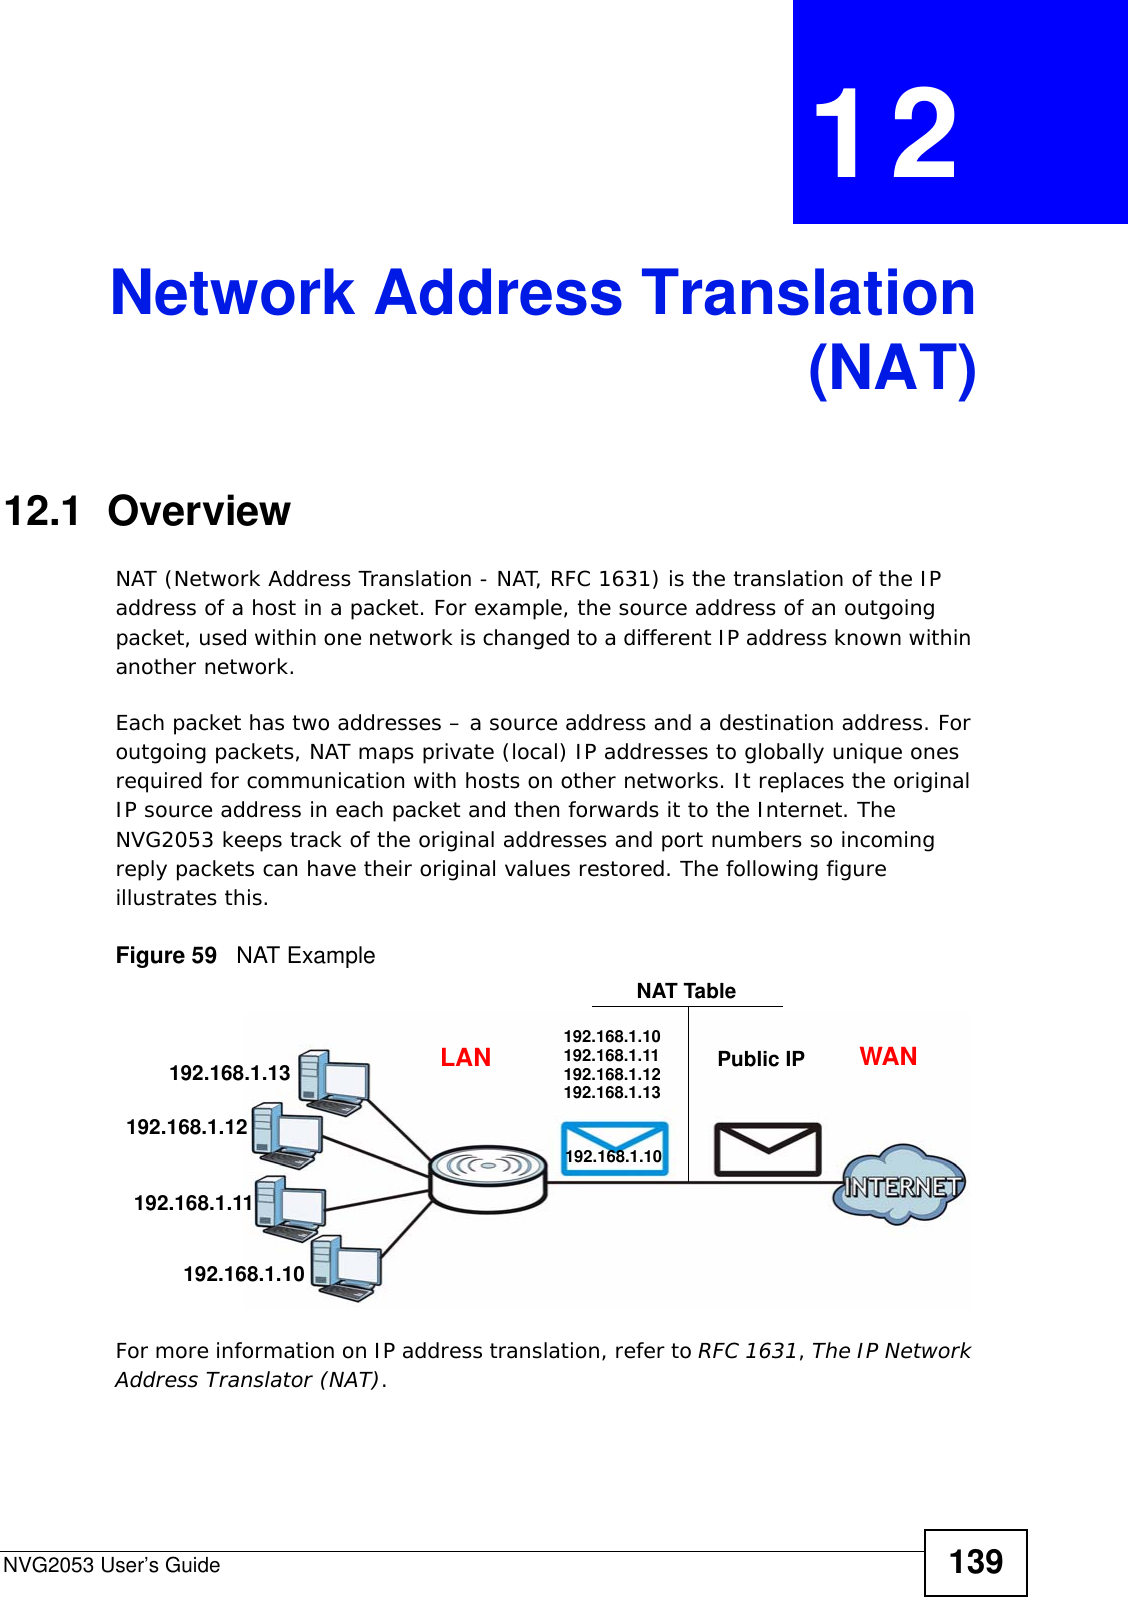 NVG2053 User’s Guide 139CHAPTER  12 Network Address Translation(NAT)12.1  Overview   NAT (Network Address Translation - NAT, RFC 1631) is the translation of the IP address of a host in a packet. For example, the source address of an outgoing packet, used within one network is changed to a different IP address known within another network.Each packet has two addresses – a source address and a destination address. For outgoing packets, NAT maps private (local) IP addresses to globally unique ones required for communication with hosts on other networks. It replaces the original IP source address in each packet and then forwards it to the Internet. The NVG2053 keeps track of the original addresses and port numbers so incoming reply packets can have their original values restored. The following figure illustrates this.Figure 59   NAT ExampleFor more information on IP address translation, refer to RFC 1631, The IP Network Address Translator (NAT).192.168.1.13192.168.1.12192.168.1.11192.168.1.10192.168.1.10192.168.1.10192.168.1.11192.168.1.12192.168.1.13Public IPNAT TableLAN WAN